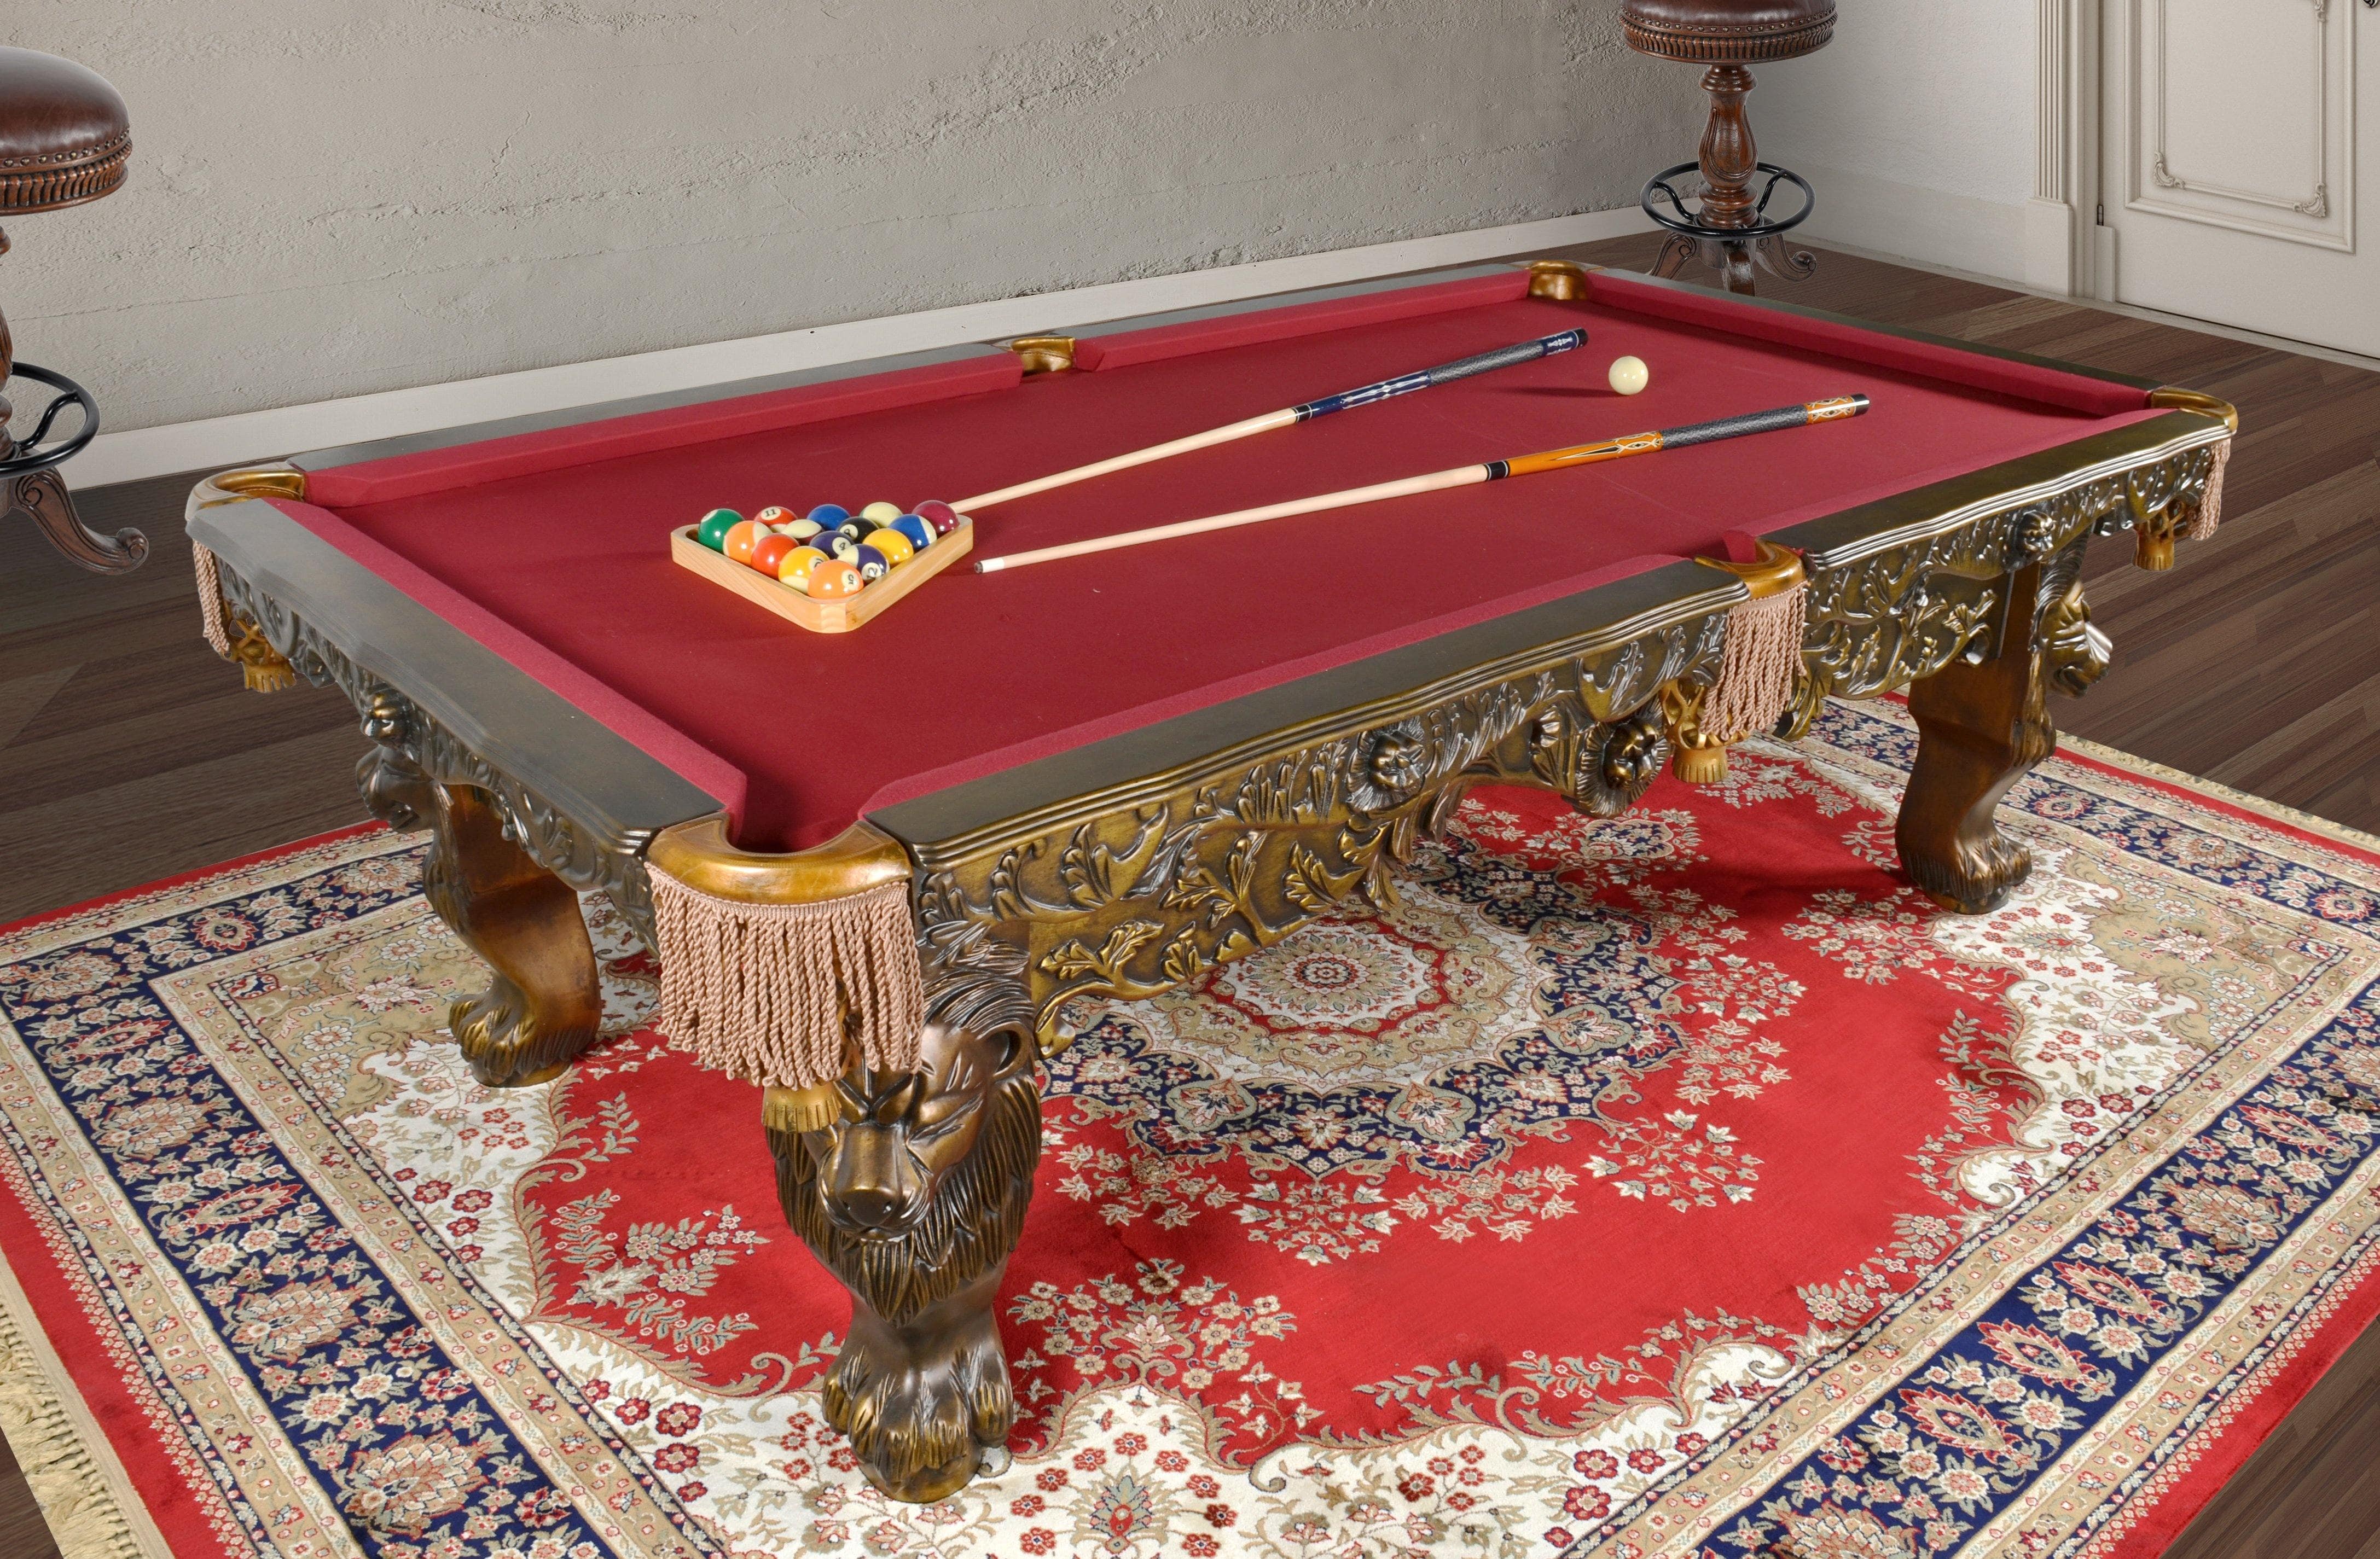 AFD Home Pool Table 100" Monarch Luxury Pro Pool Table Traditional Billiard Game Table